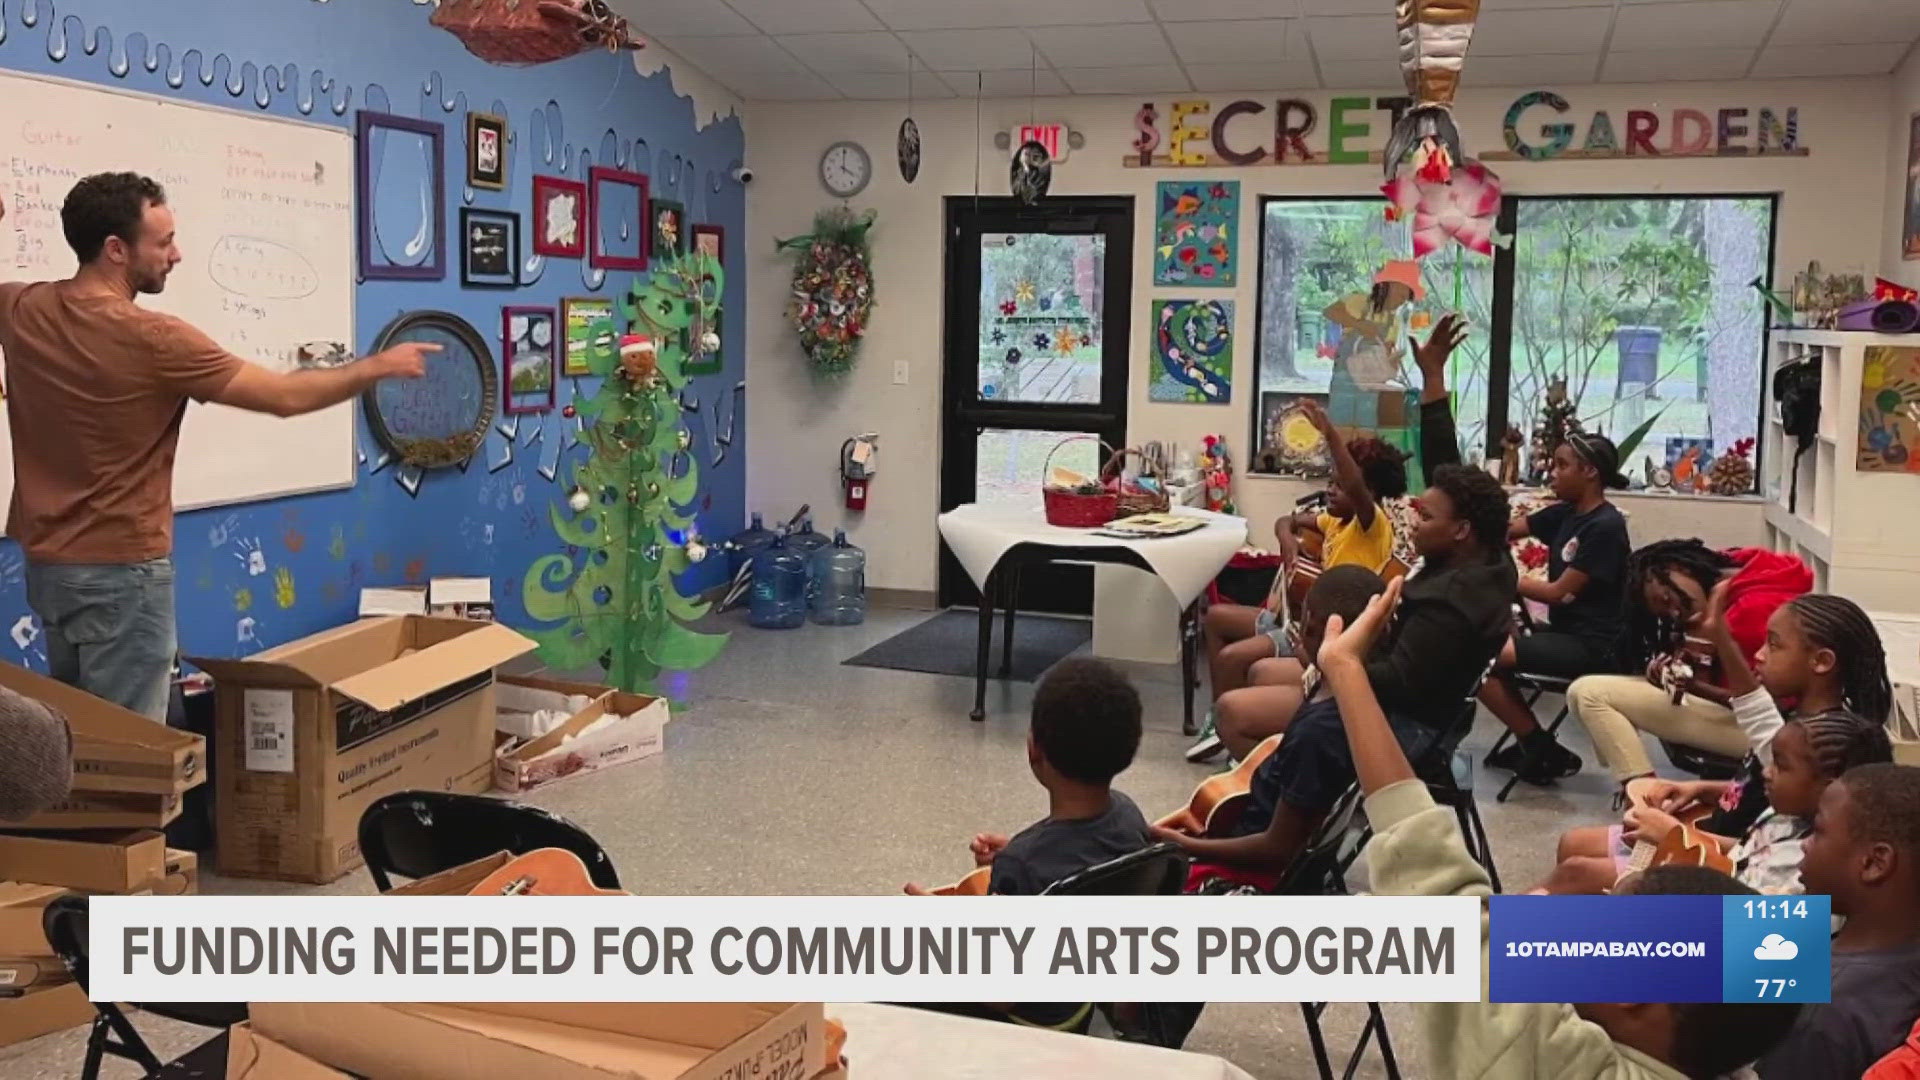 Community Stepping Stones offers kids the opportunity to express themselves through art education.